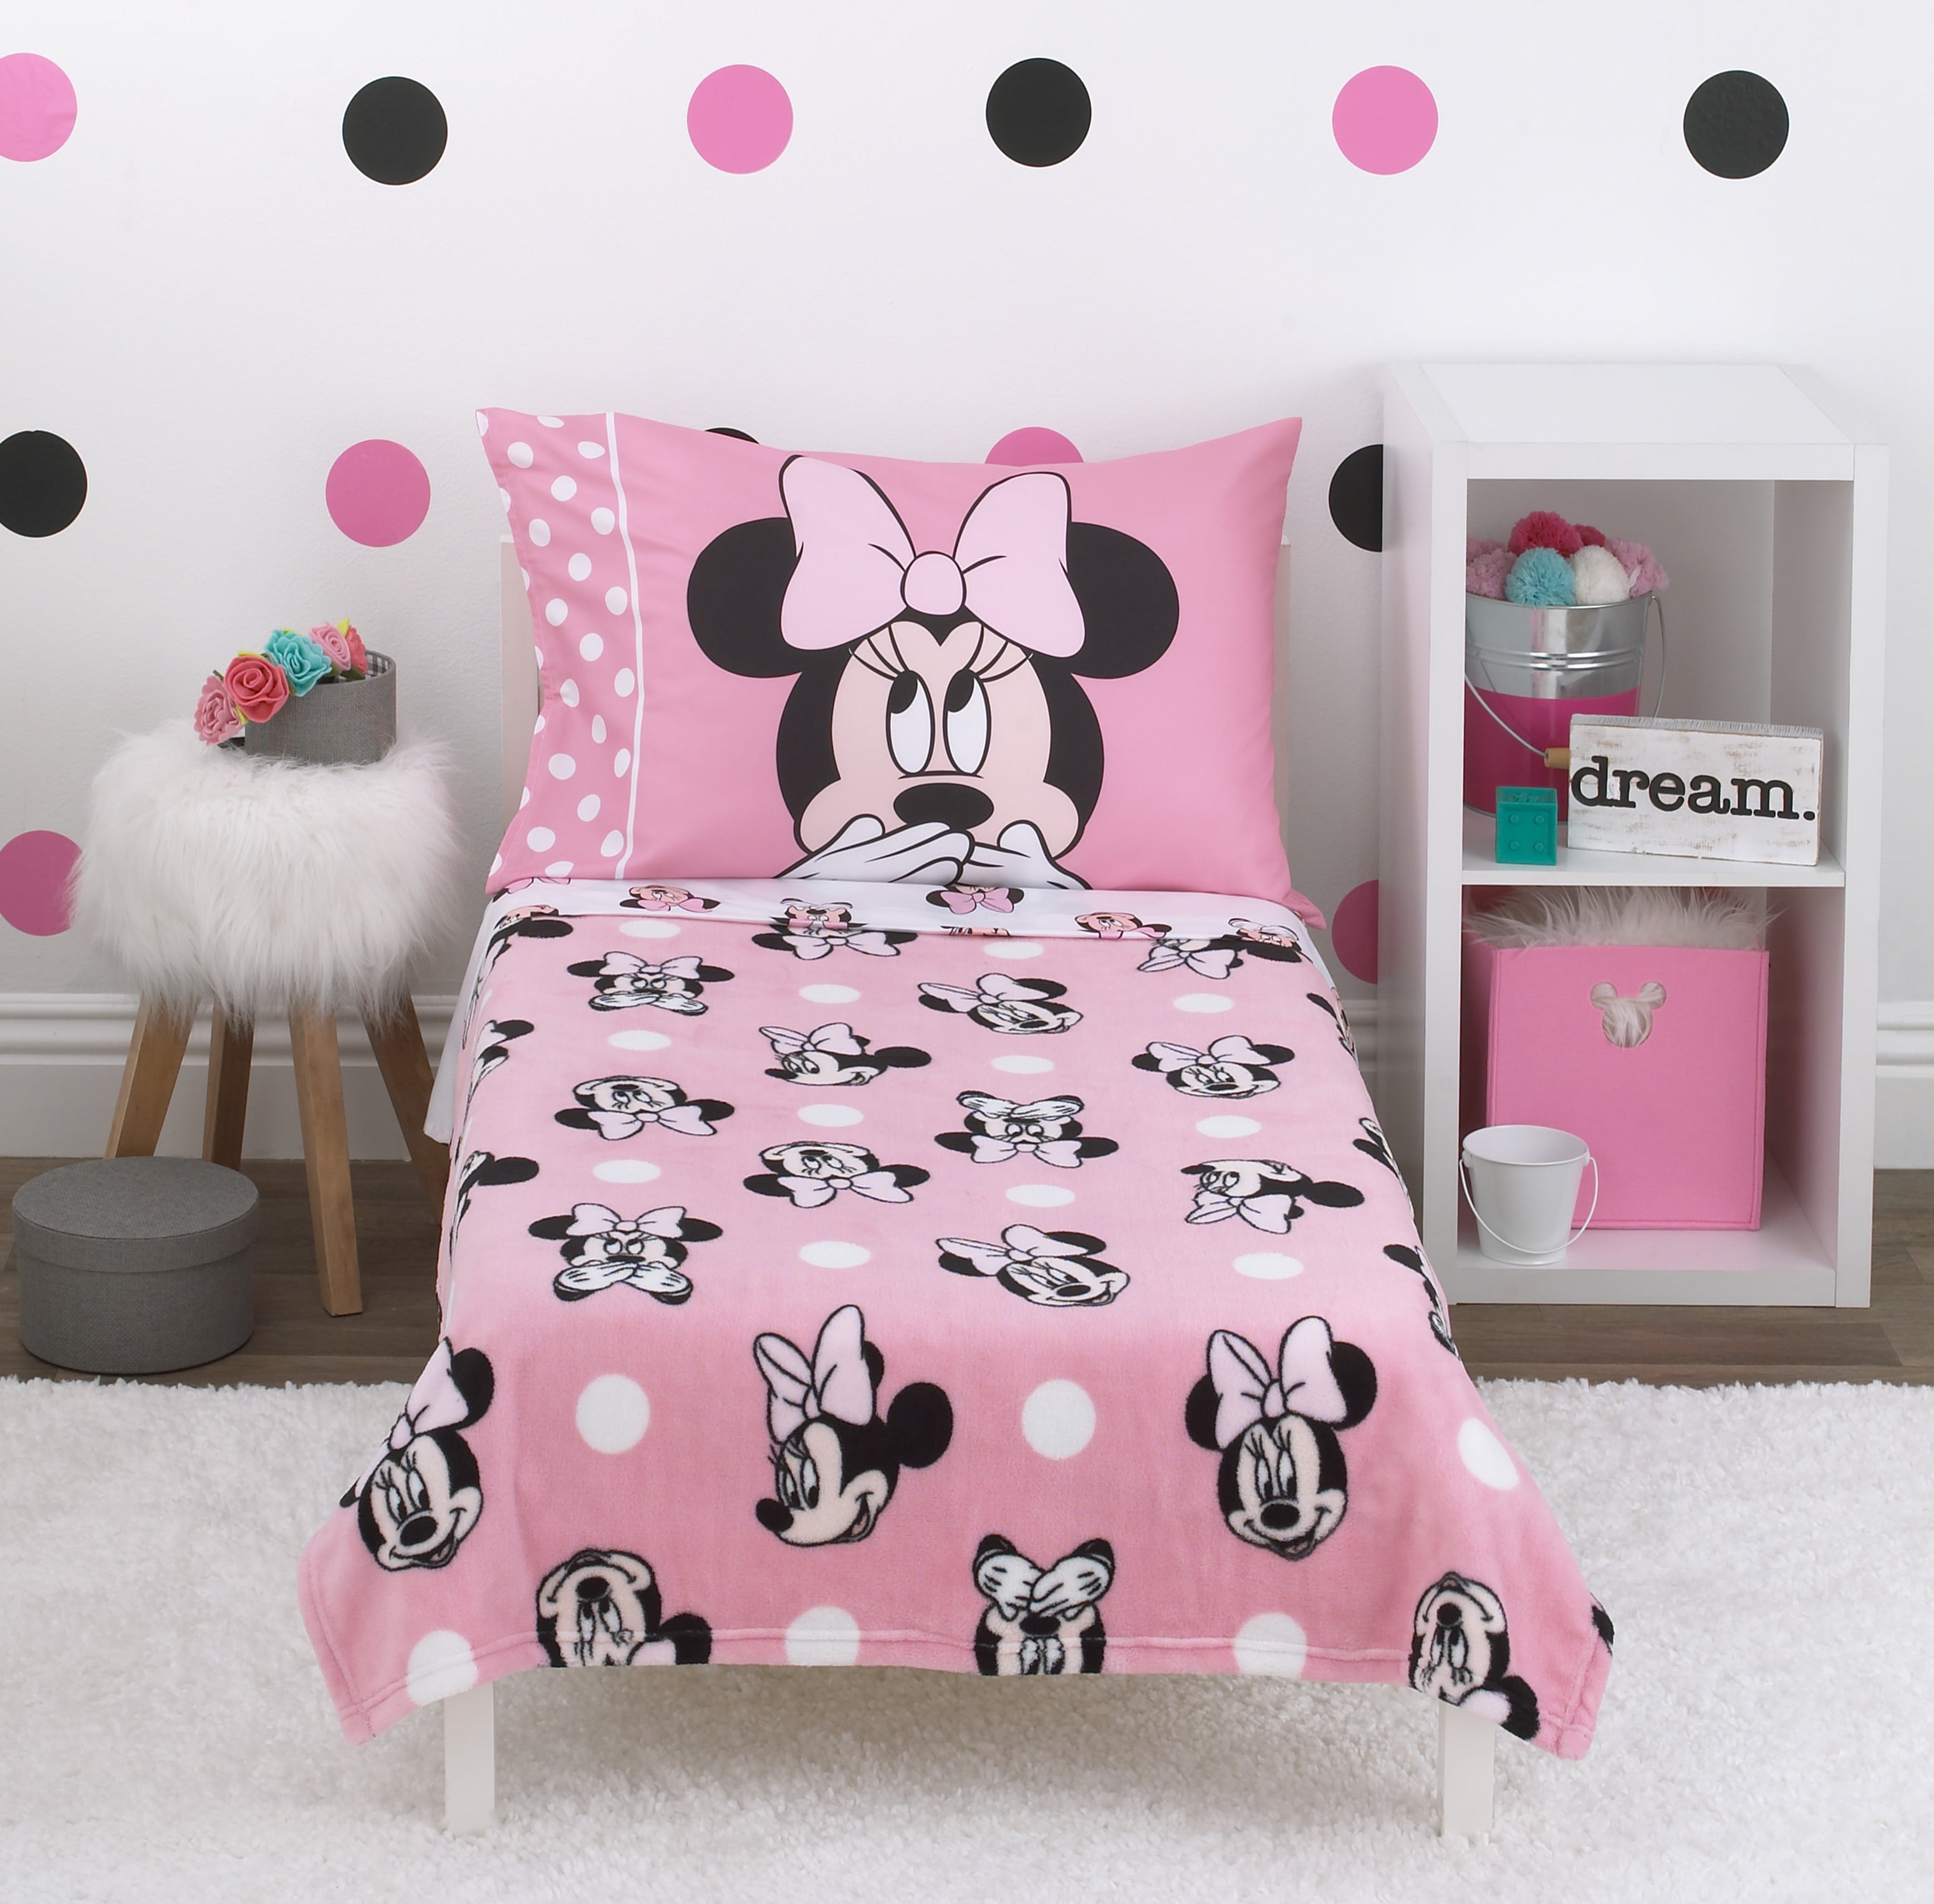 Disney Minnie Mouse What a Doll Pink Bedding Set Pillowcase & Duvet Cover